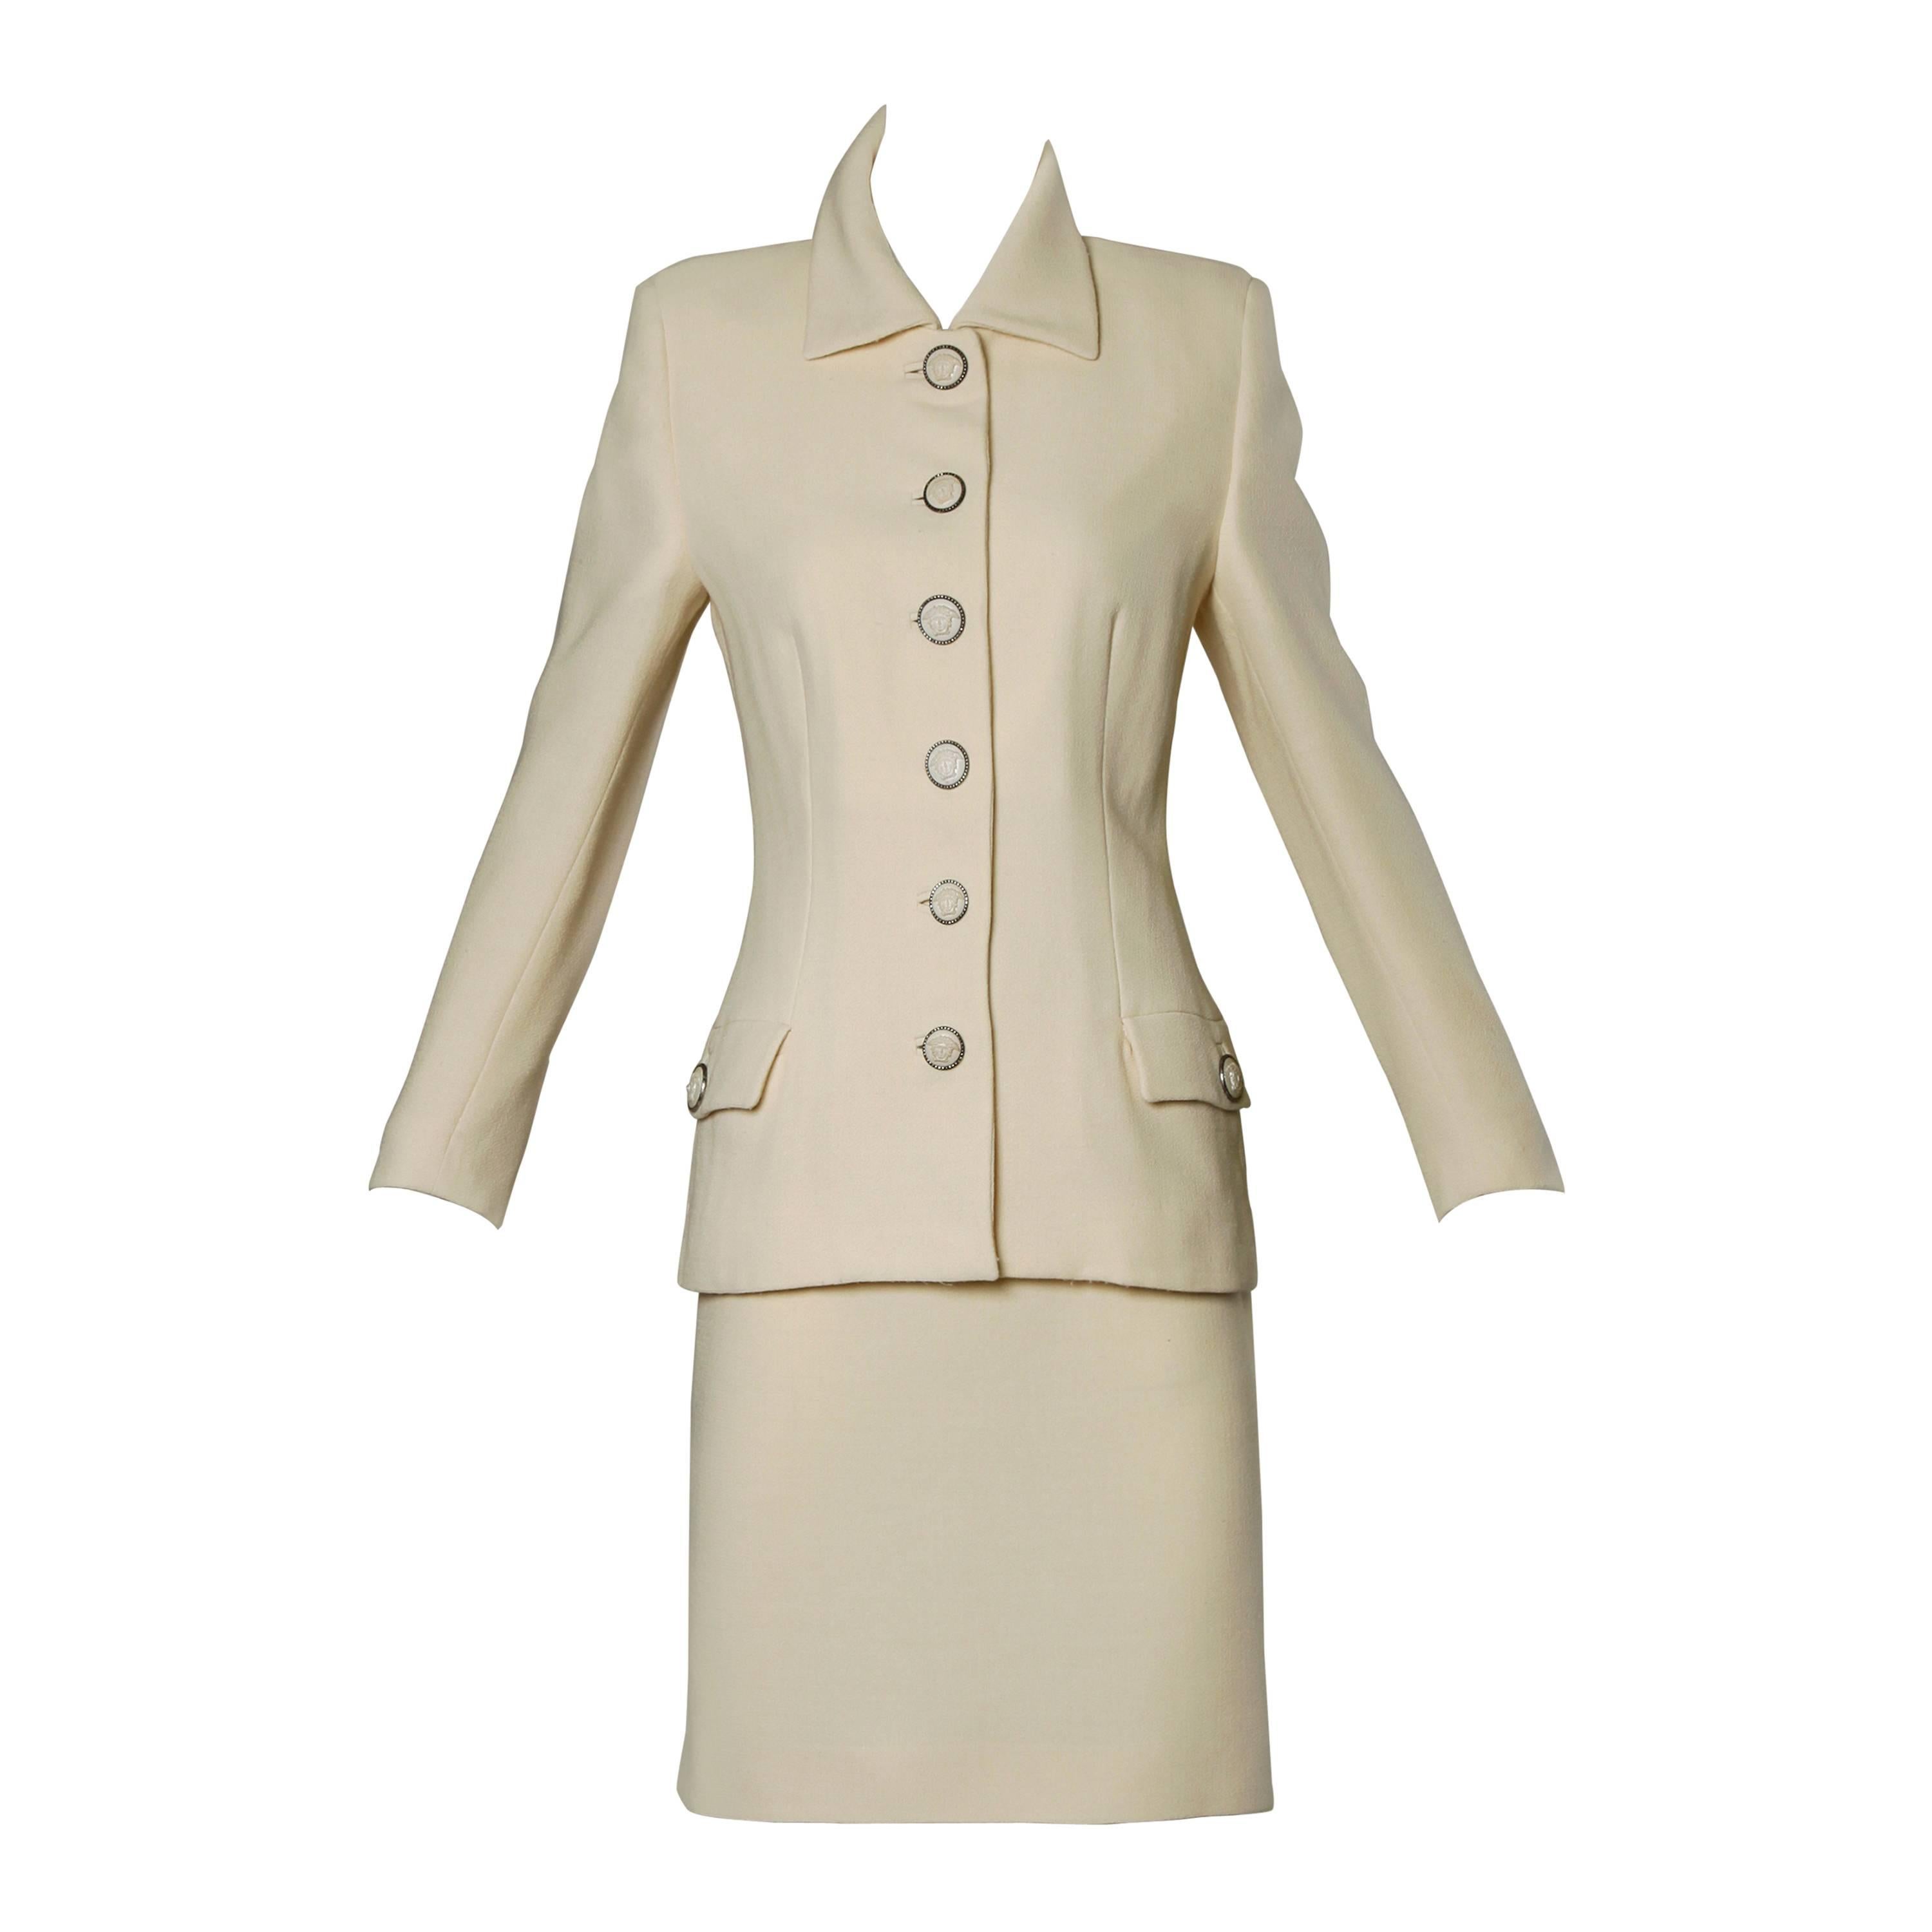 Gianni Versace Couture Vintage 90s Wool Jacket + Skirt Suit with Medusa Buttons For Sale